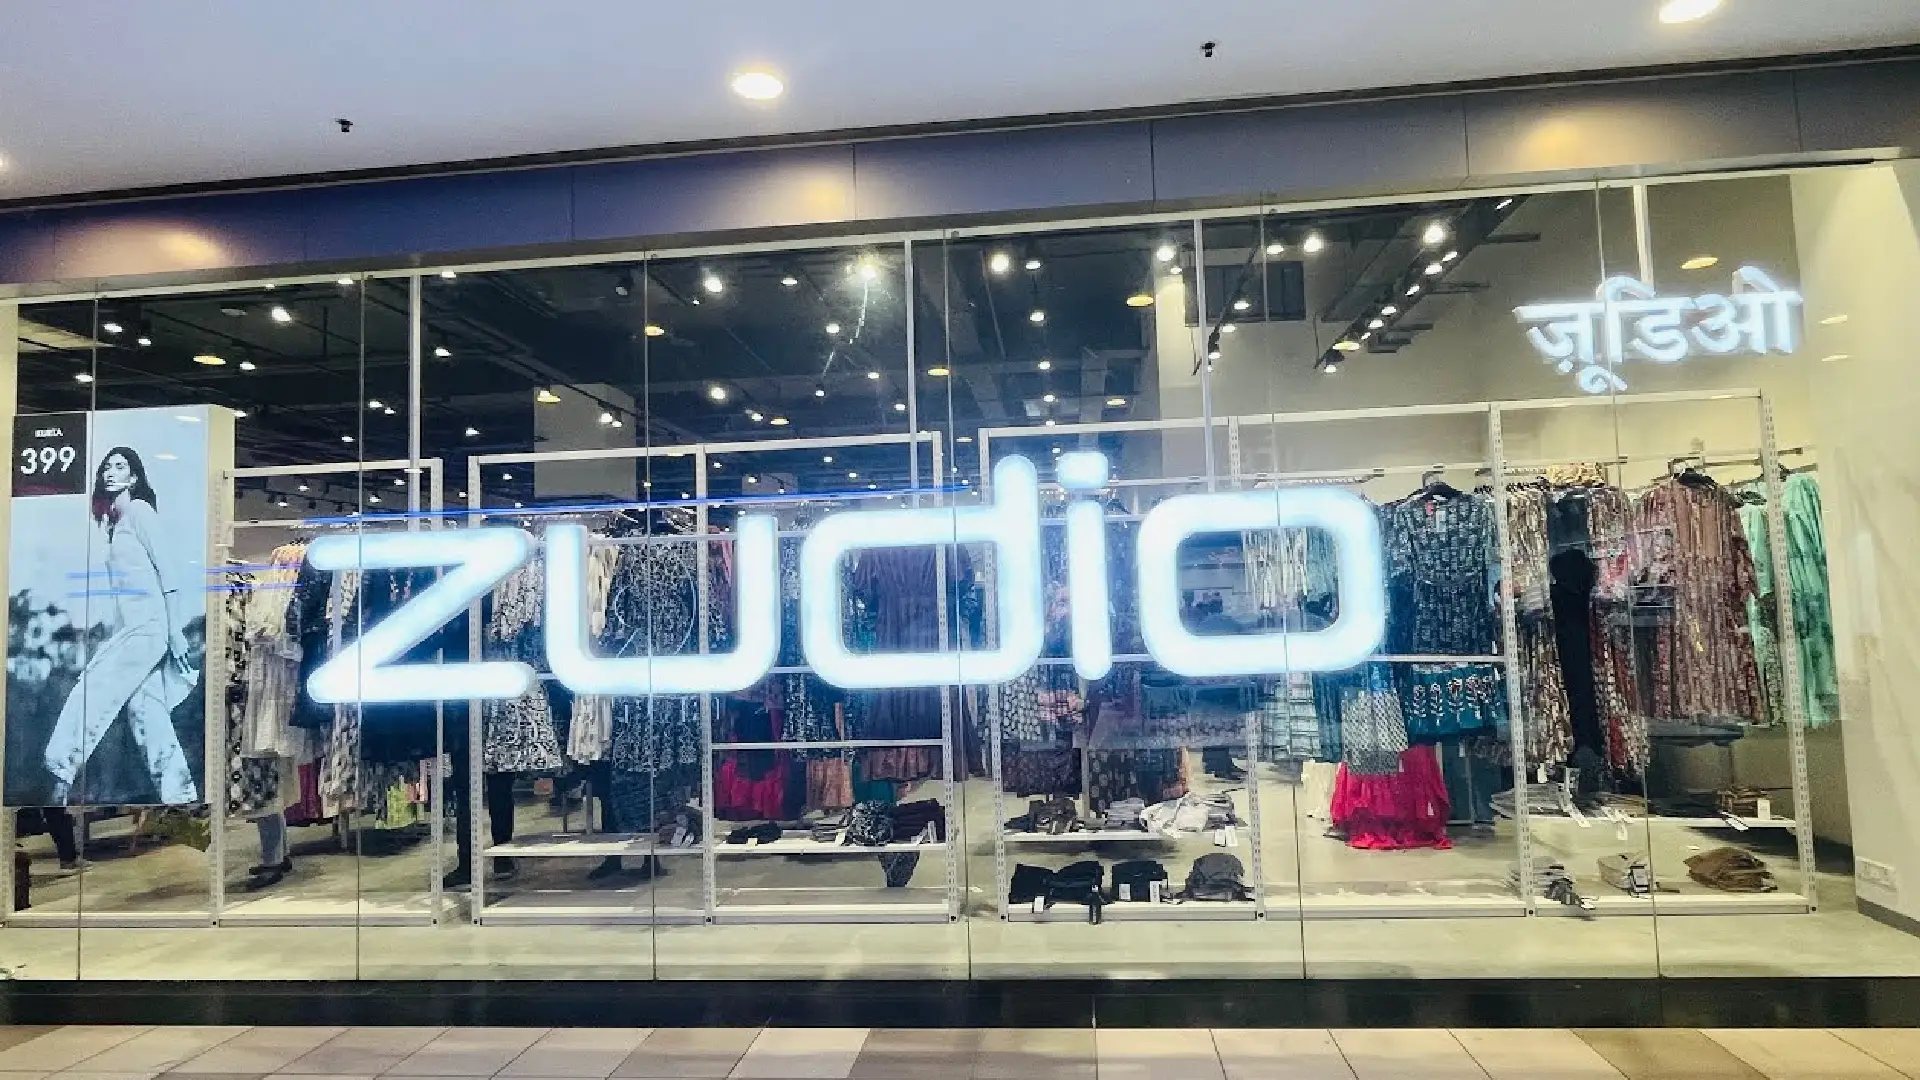 Zudio is one of the rapidly growing subsidiary brands of Trent